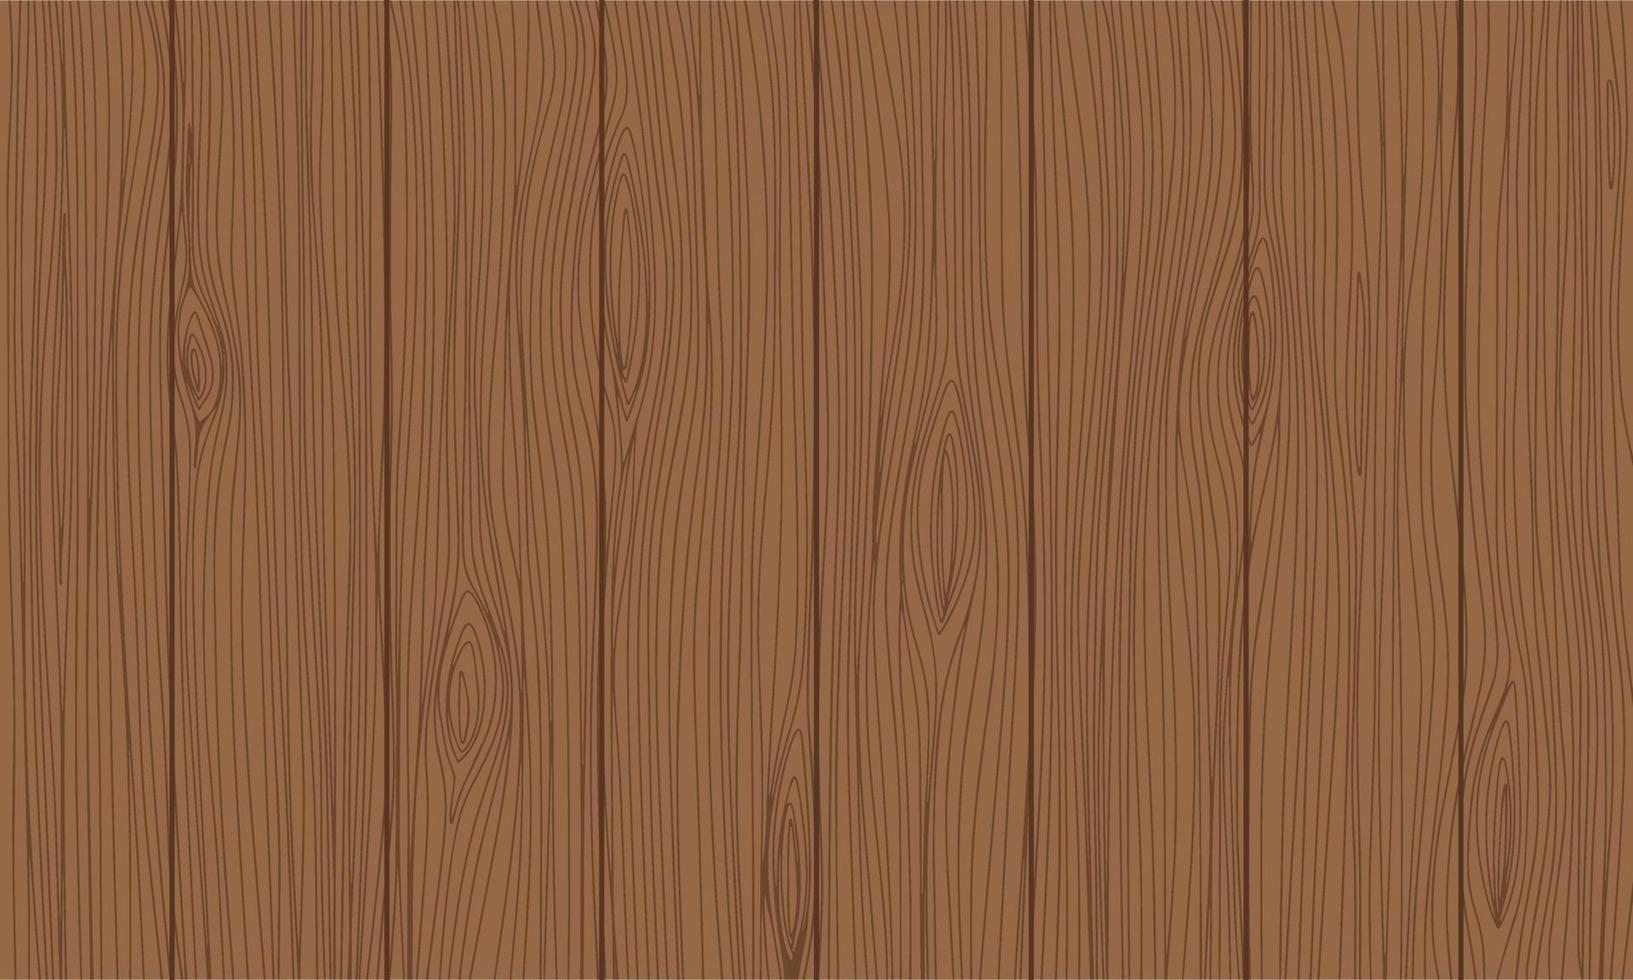 Natural wooden background. Hand drawn wood texture. Vector illustration.